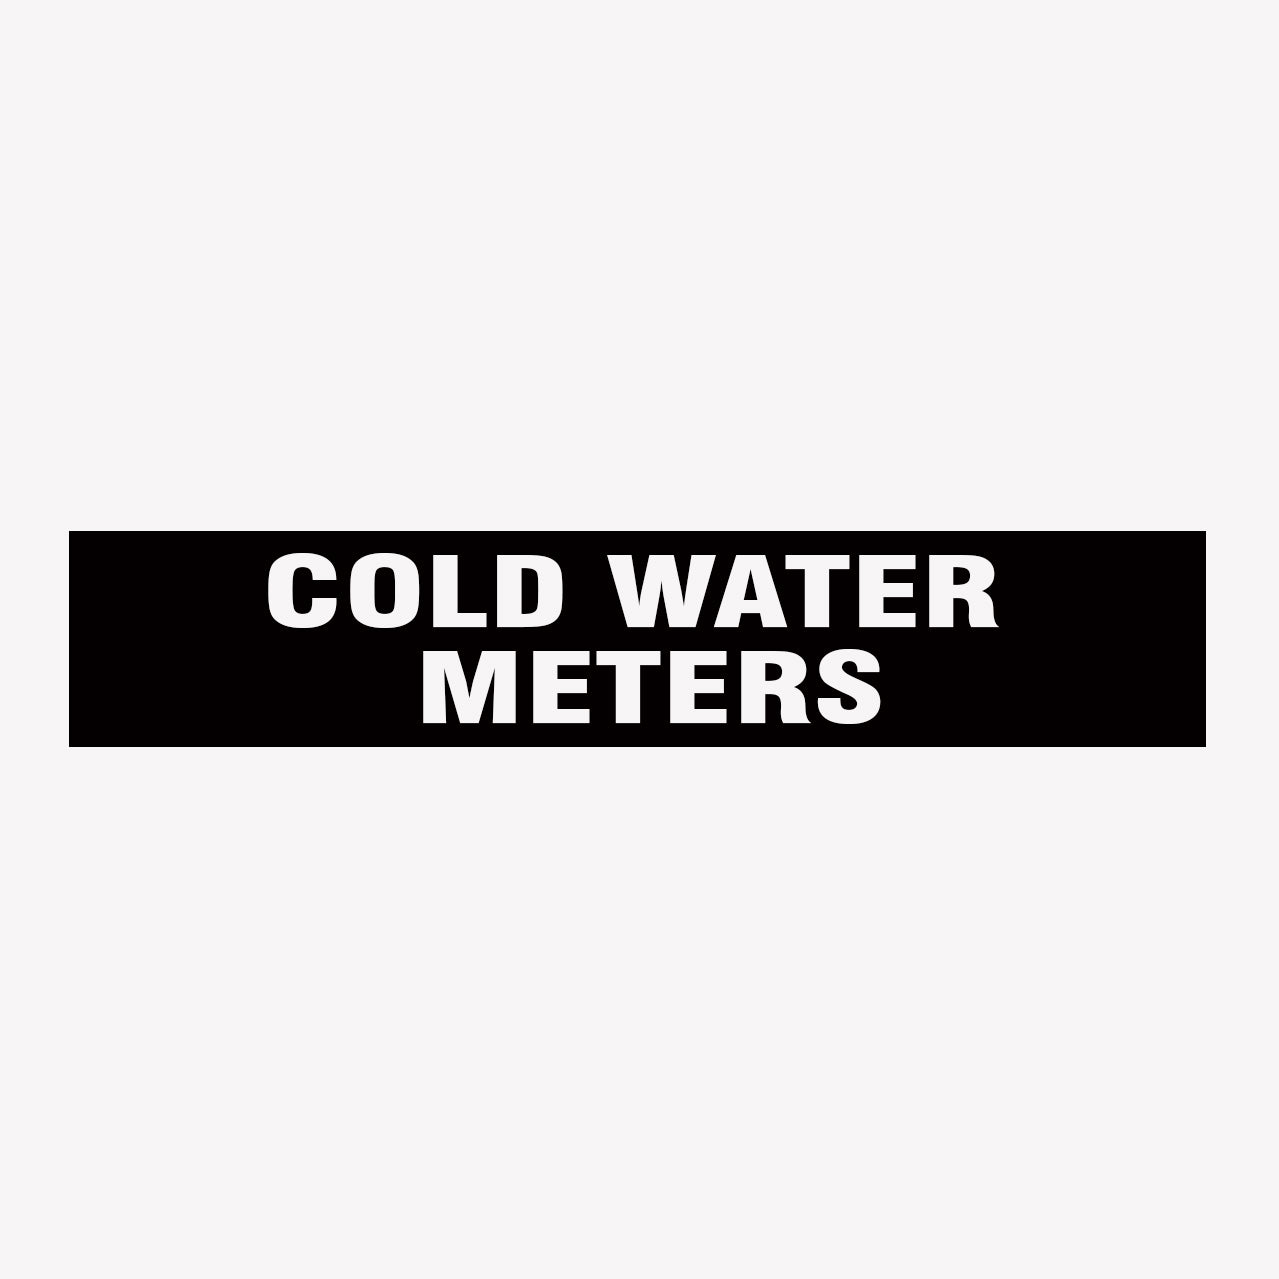 COLD WATER METERS SIGN